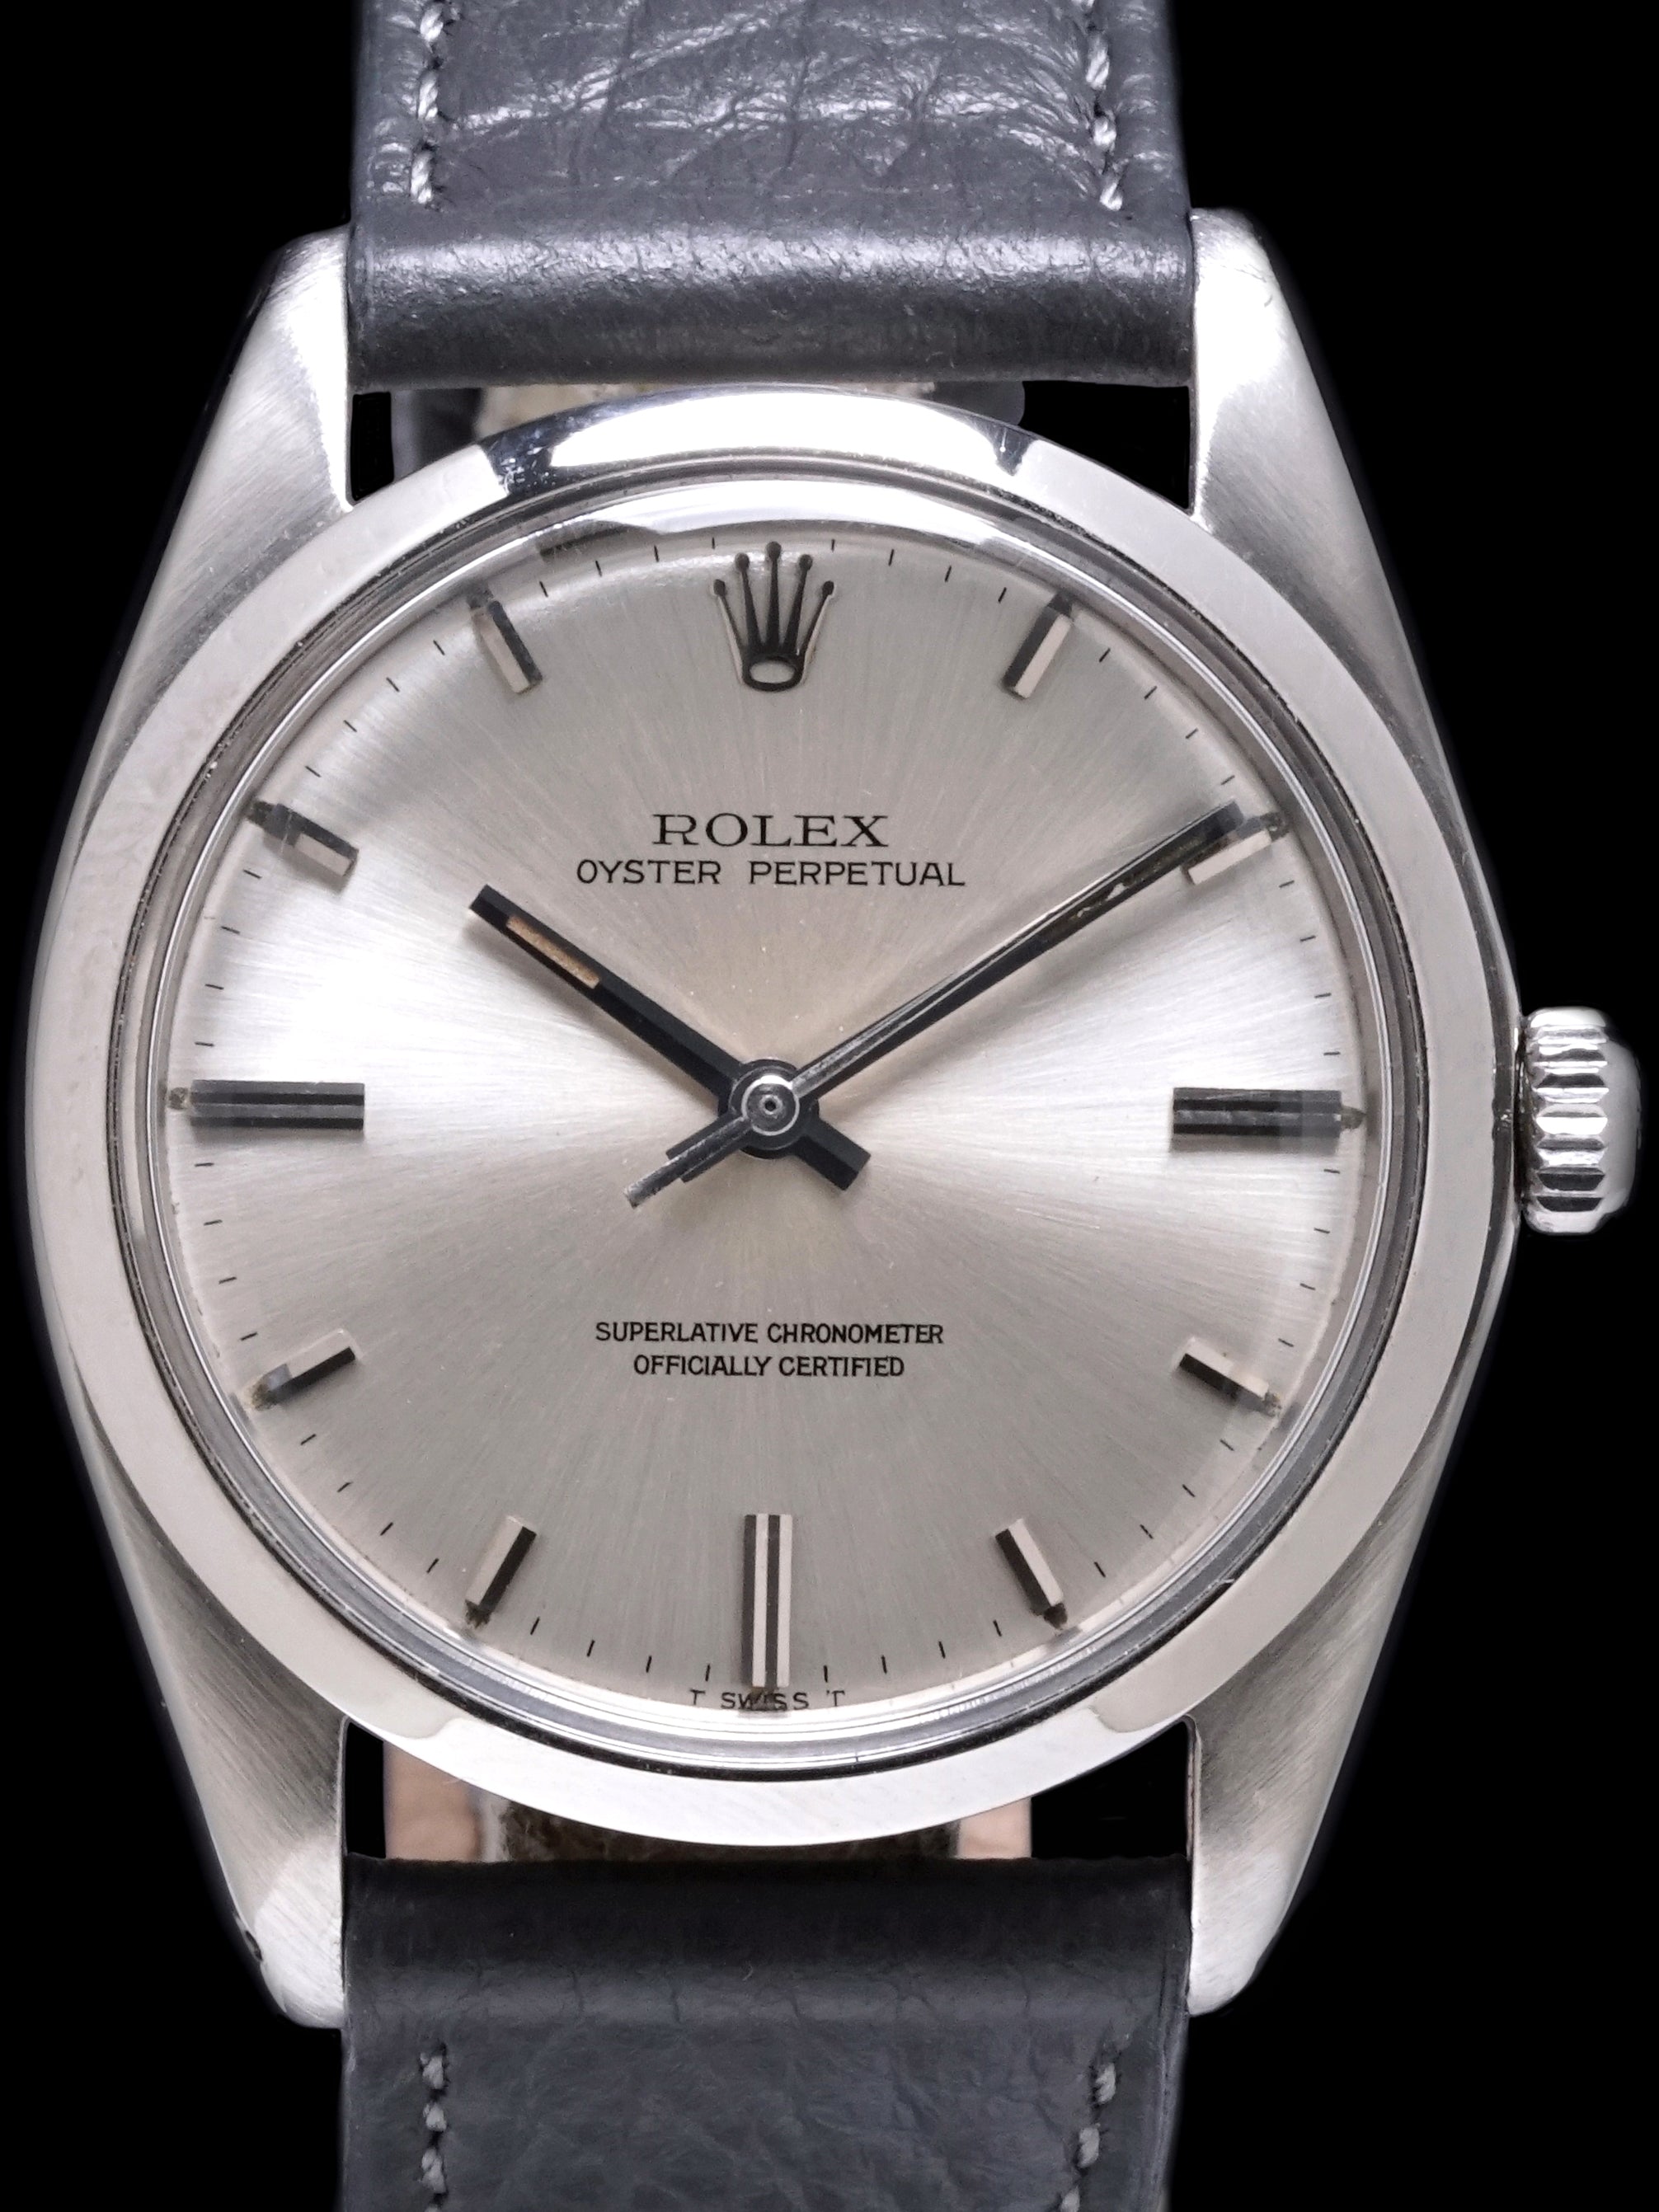 1965 Rolex Oyster-Perpetual (Ref. 1018) "Oversized Case"